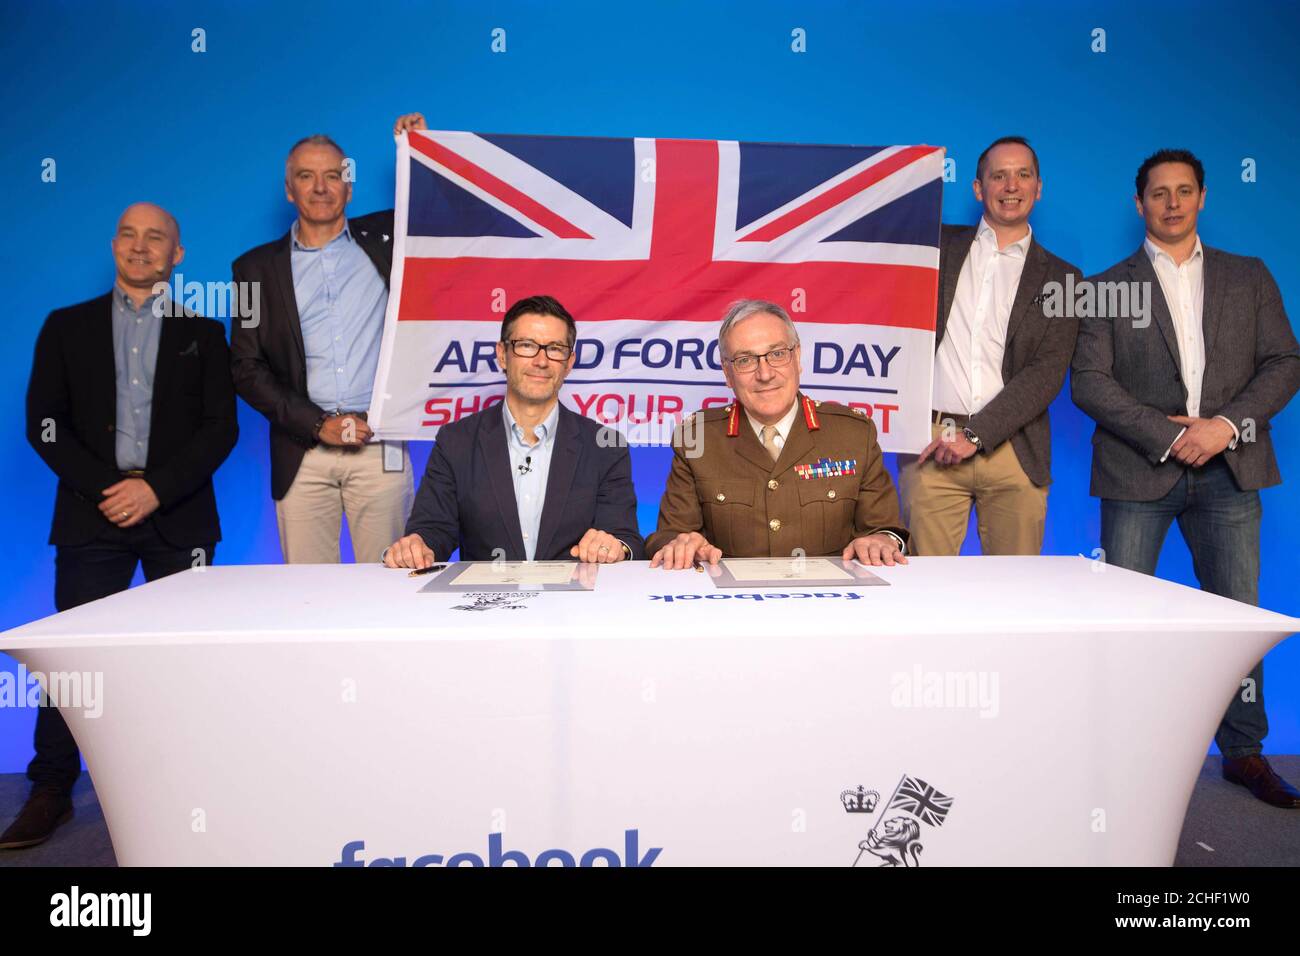 EDITORIAL USE ONLY Lieutenant General Richard Nugee, Chief of Defence People Ministry of Defence, and Steve Hatch, Director UK and Ireland Facebook sign the Armed Forces Covenant with left-right Facebook employees and veterans Andy Mihalop, Chris Jones, David Coles and Robert Scanlan which is a pledge to ensure ex-military personnel are provided with equal opportunities, at the Boost with Facebook for the Armed Forces Community event in London. Stock Photo